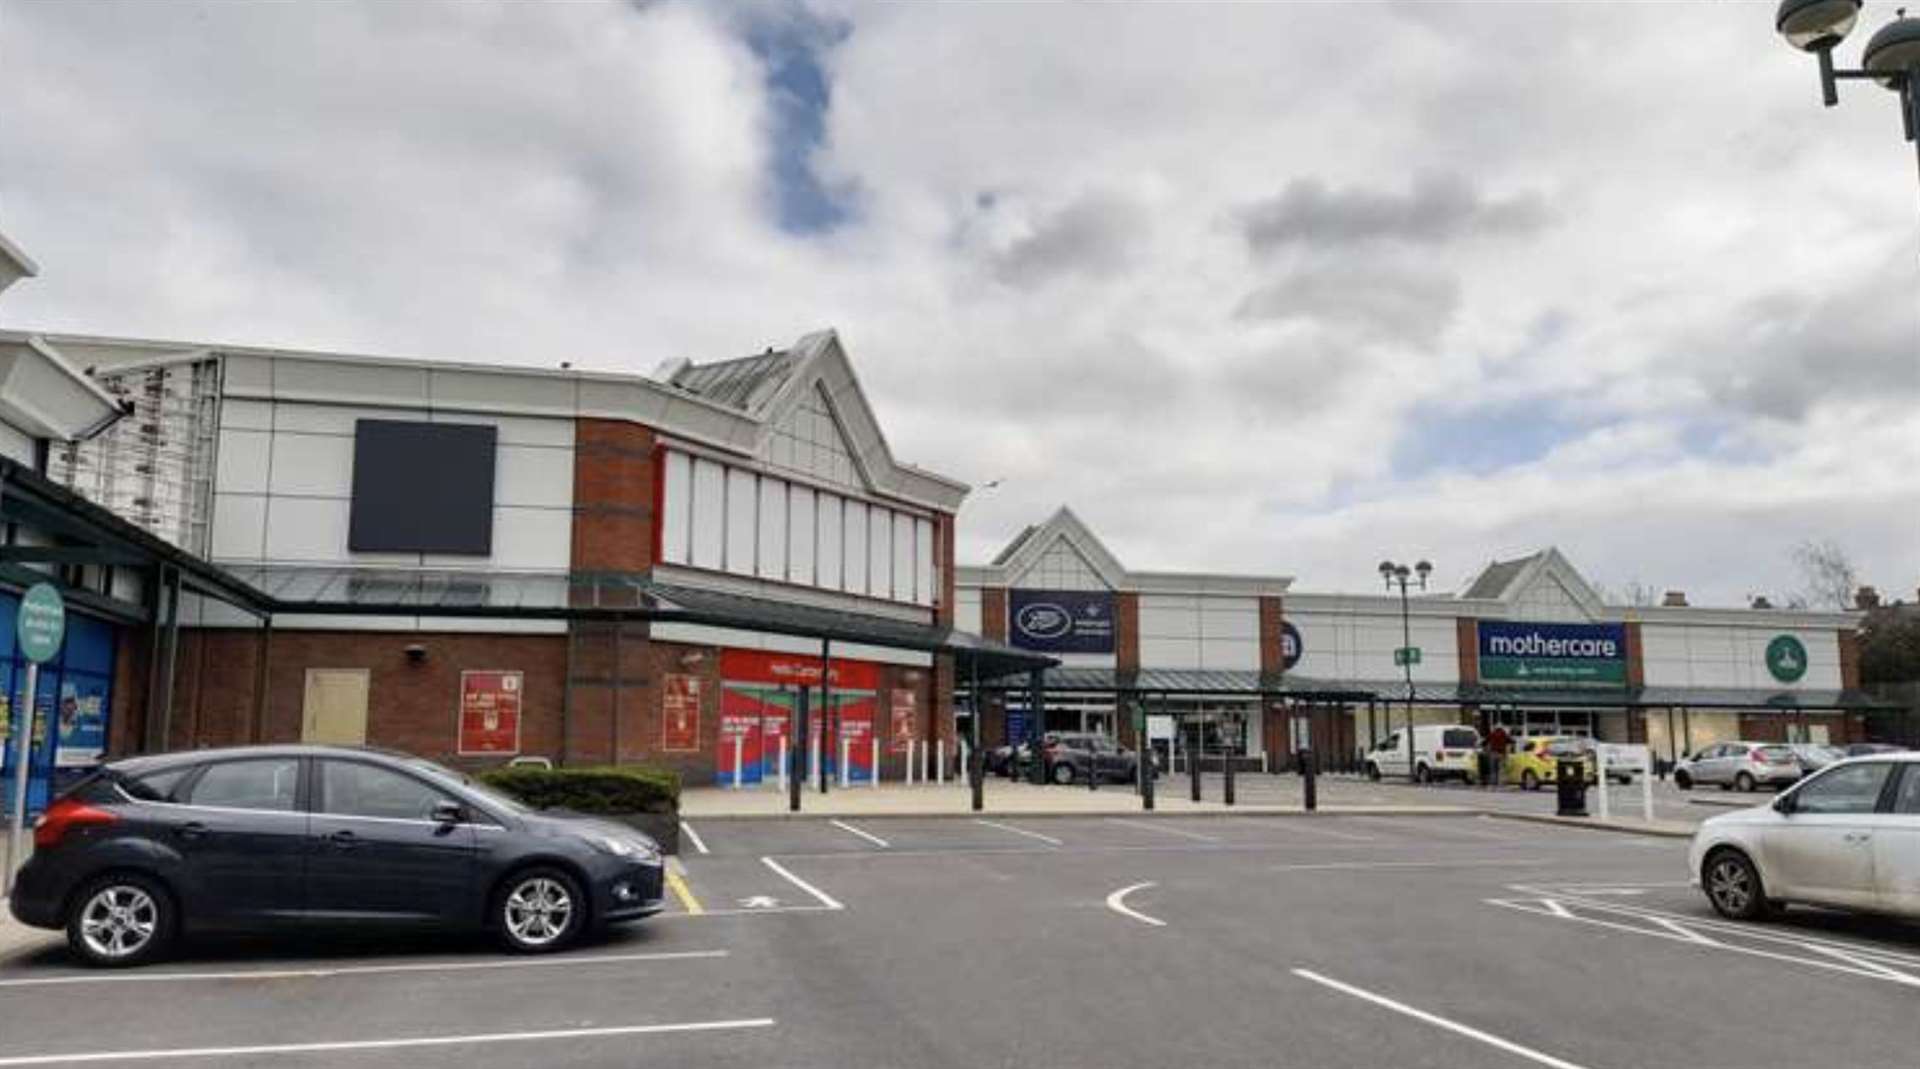 KFC could fill the gap left by Carphone Warehouse at Wincheap Retail Park